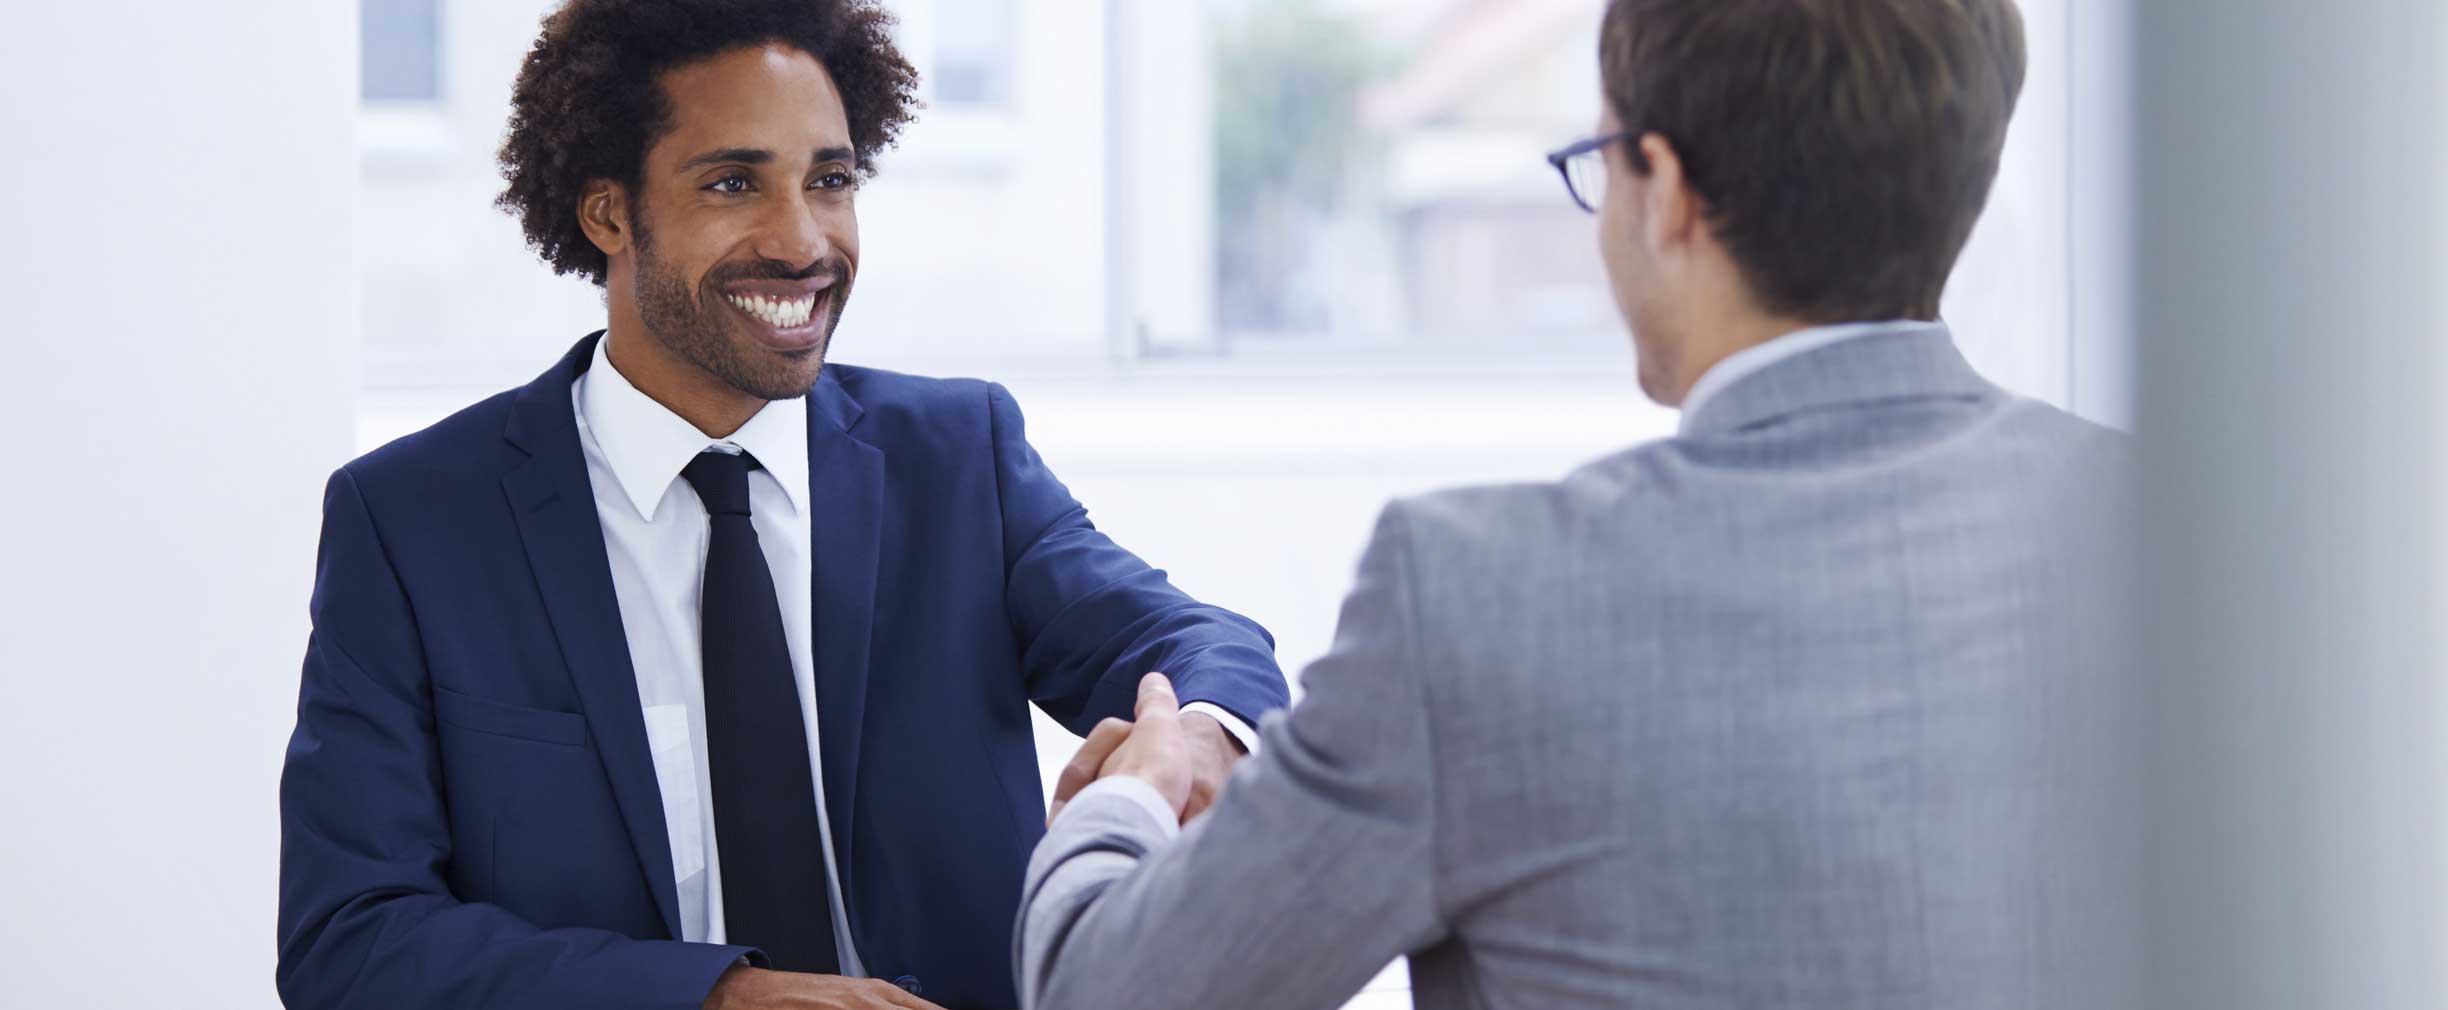 successful interview tips